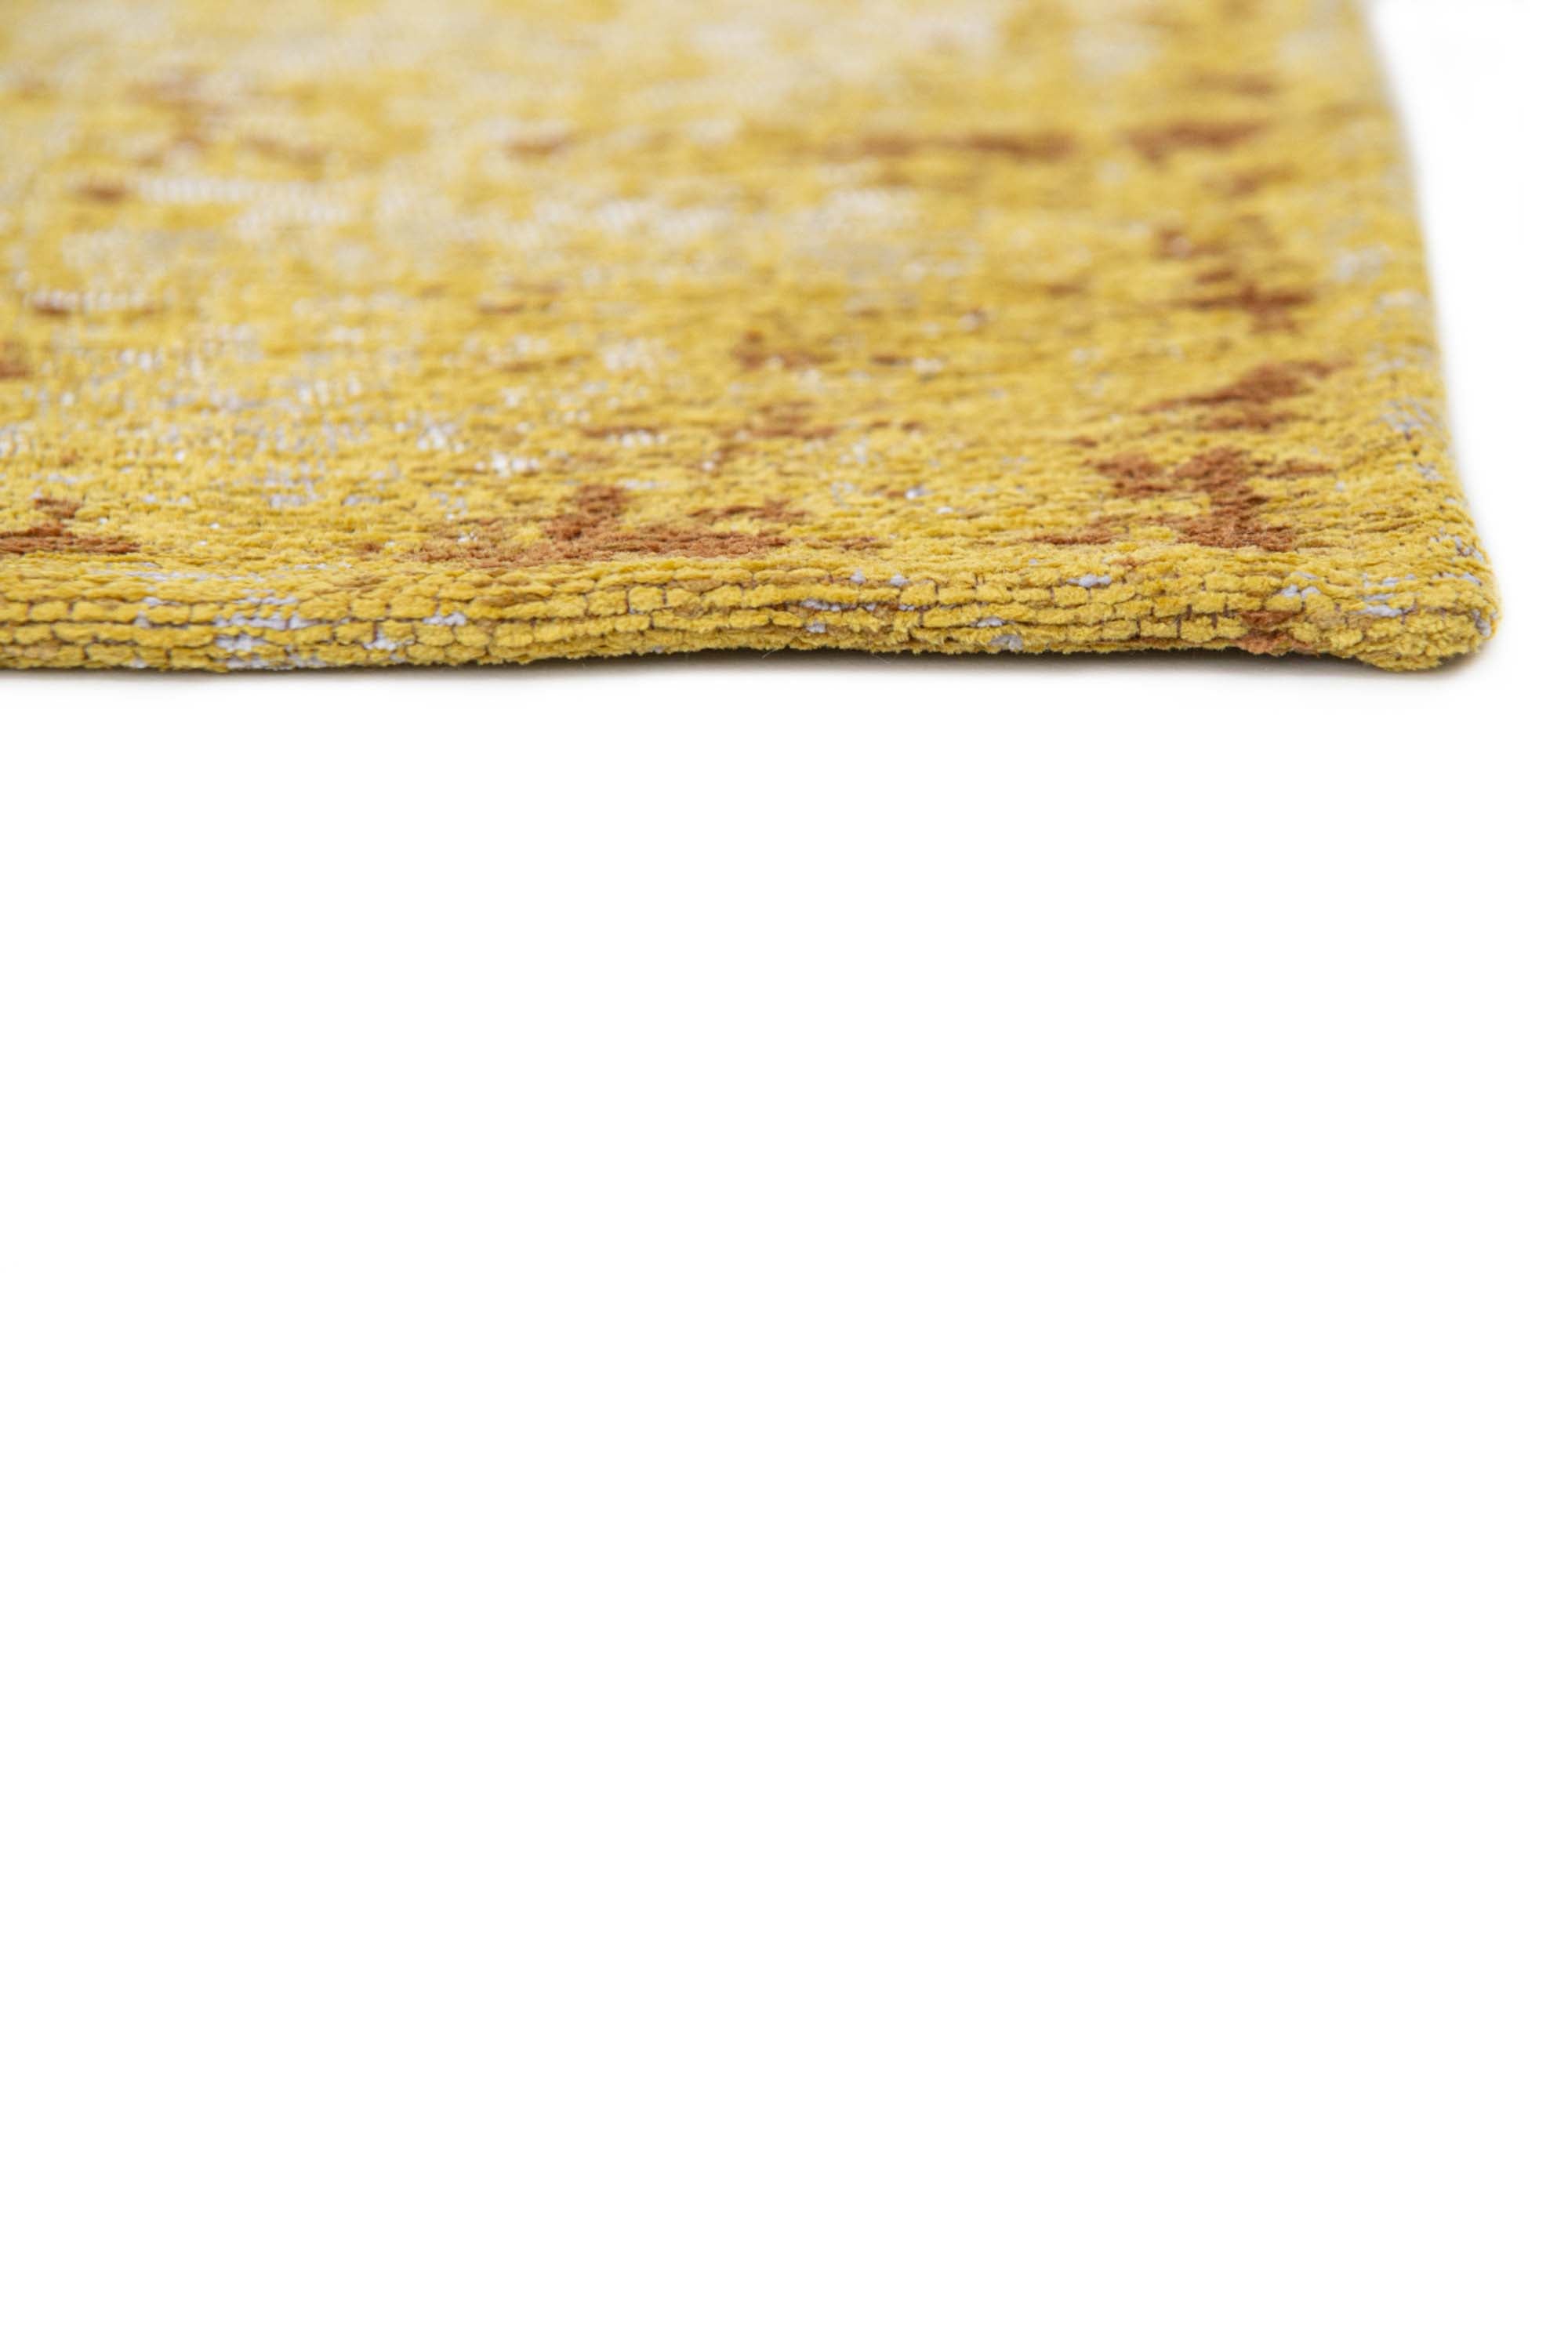 Yellow vintage Kirman-inspired rug with faded medallion pattern